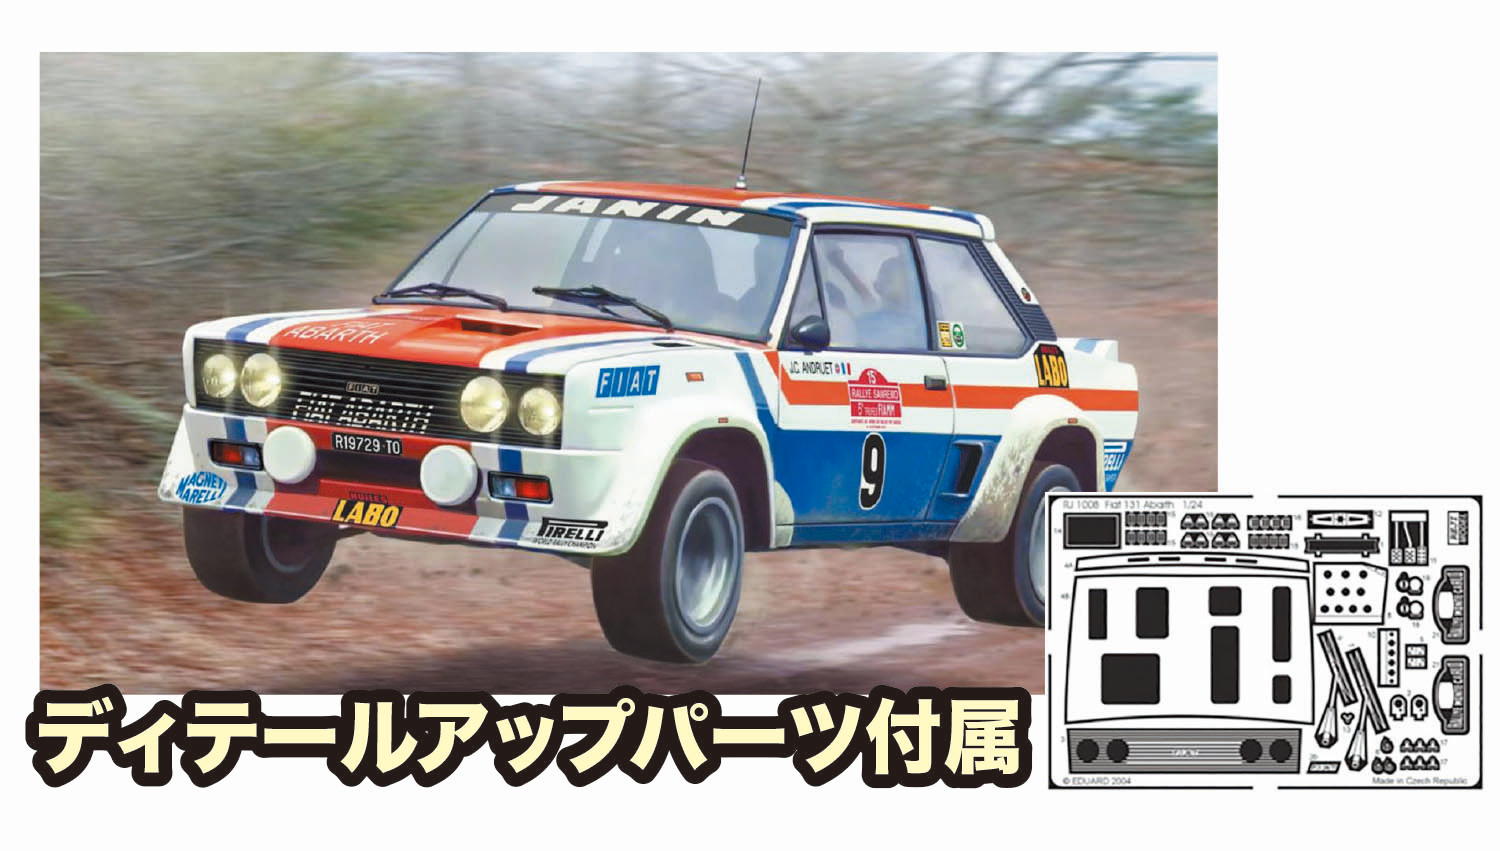 1/24 Fiat 131 Abarth 1977 Sanremo Rally Winner w/detail-up parts